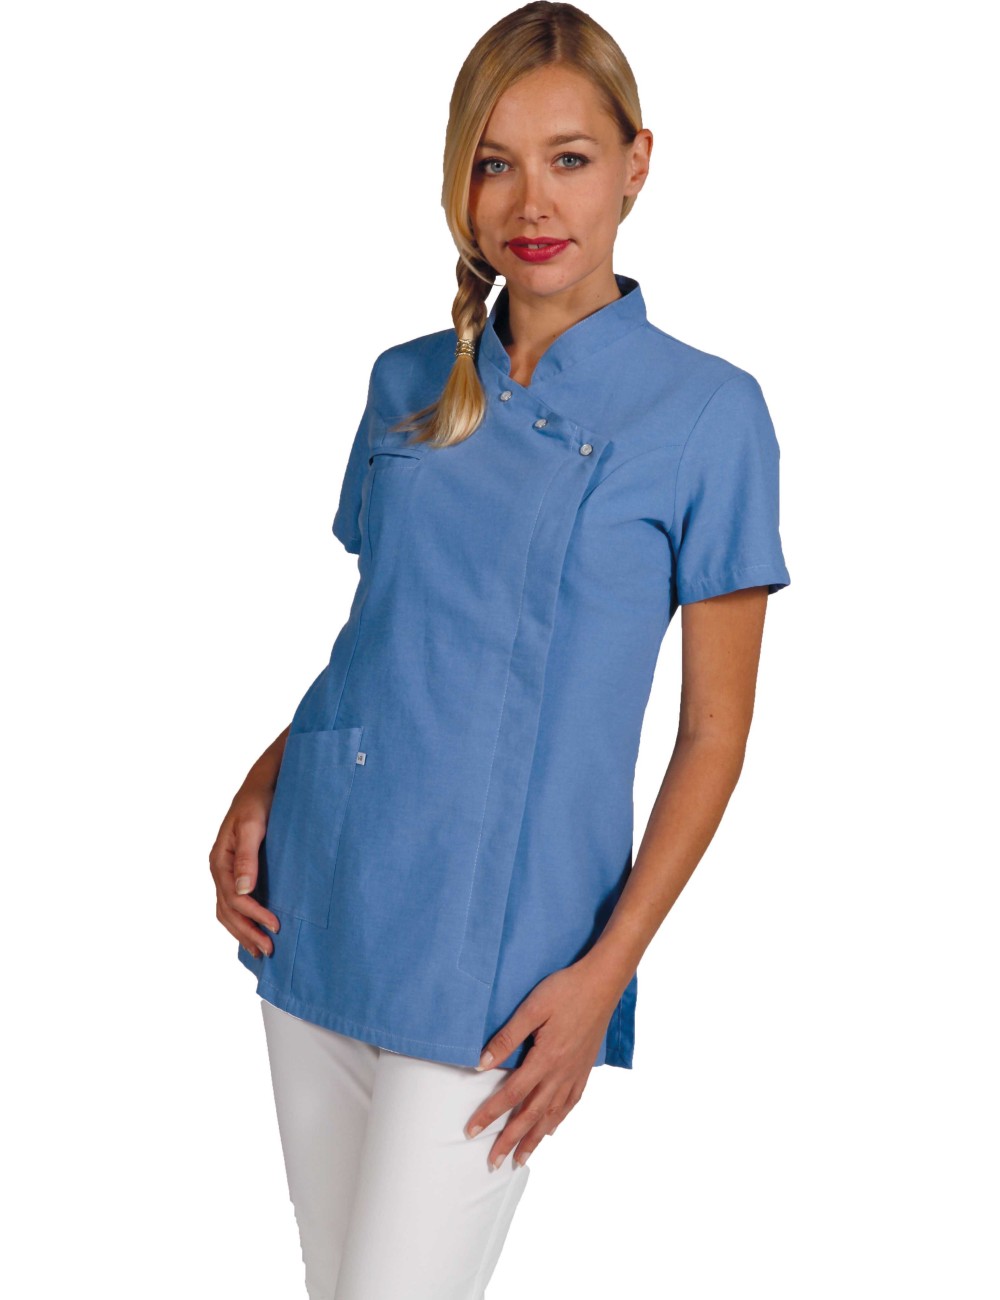 women fitted medical tunic in color